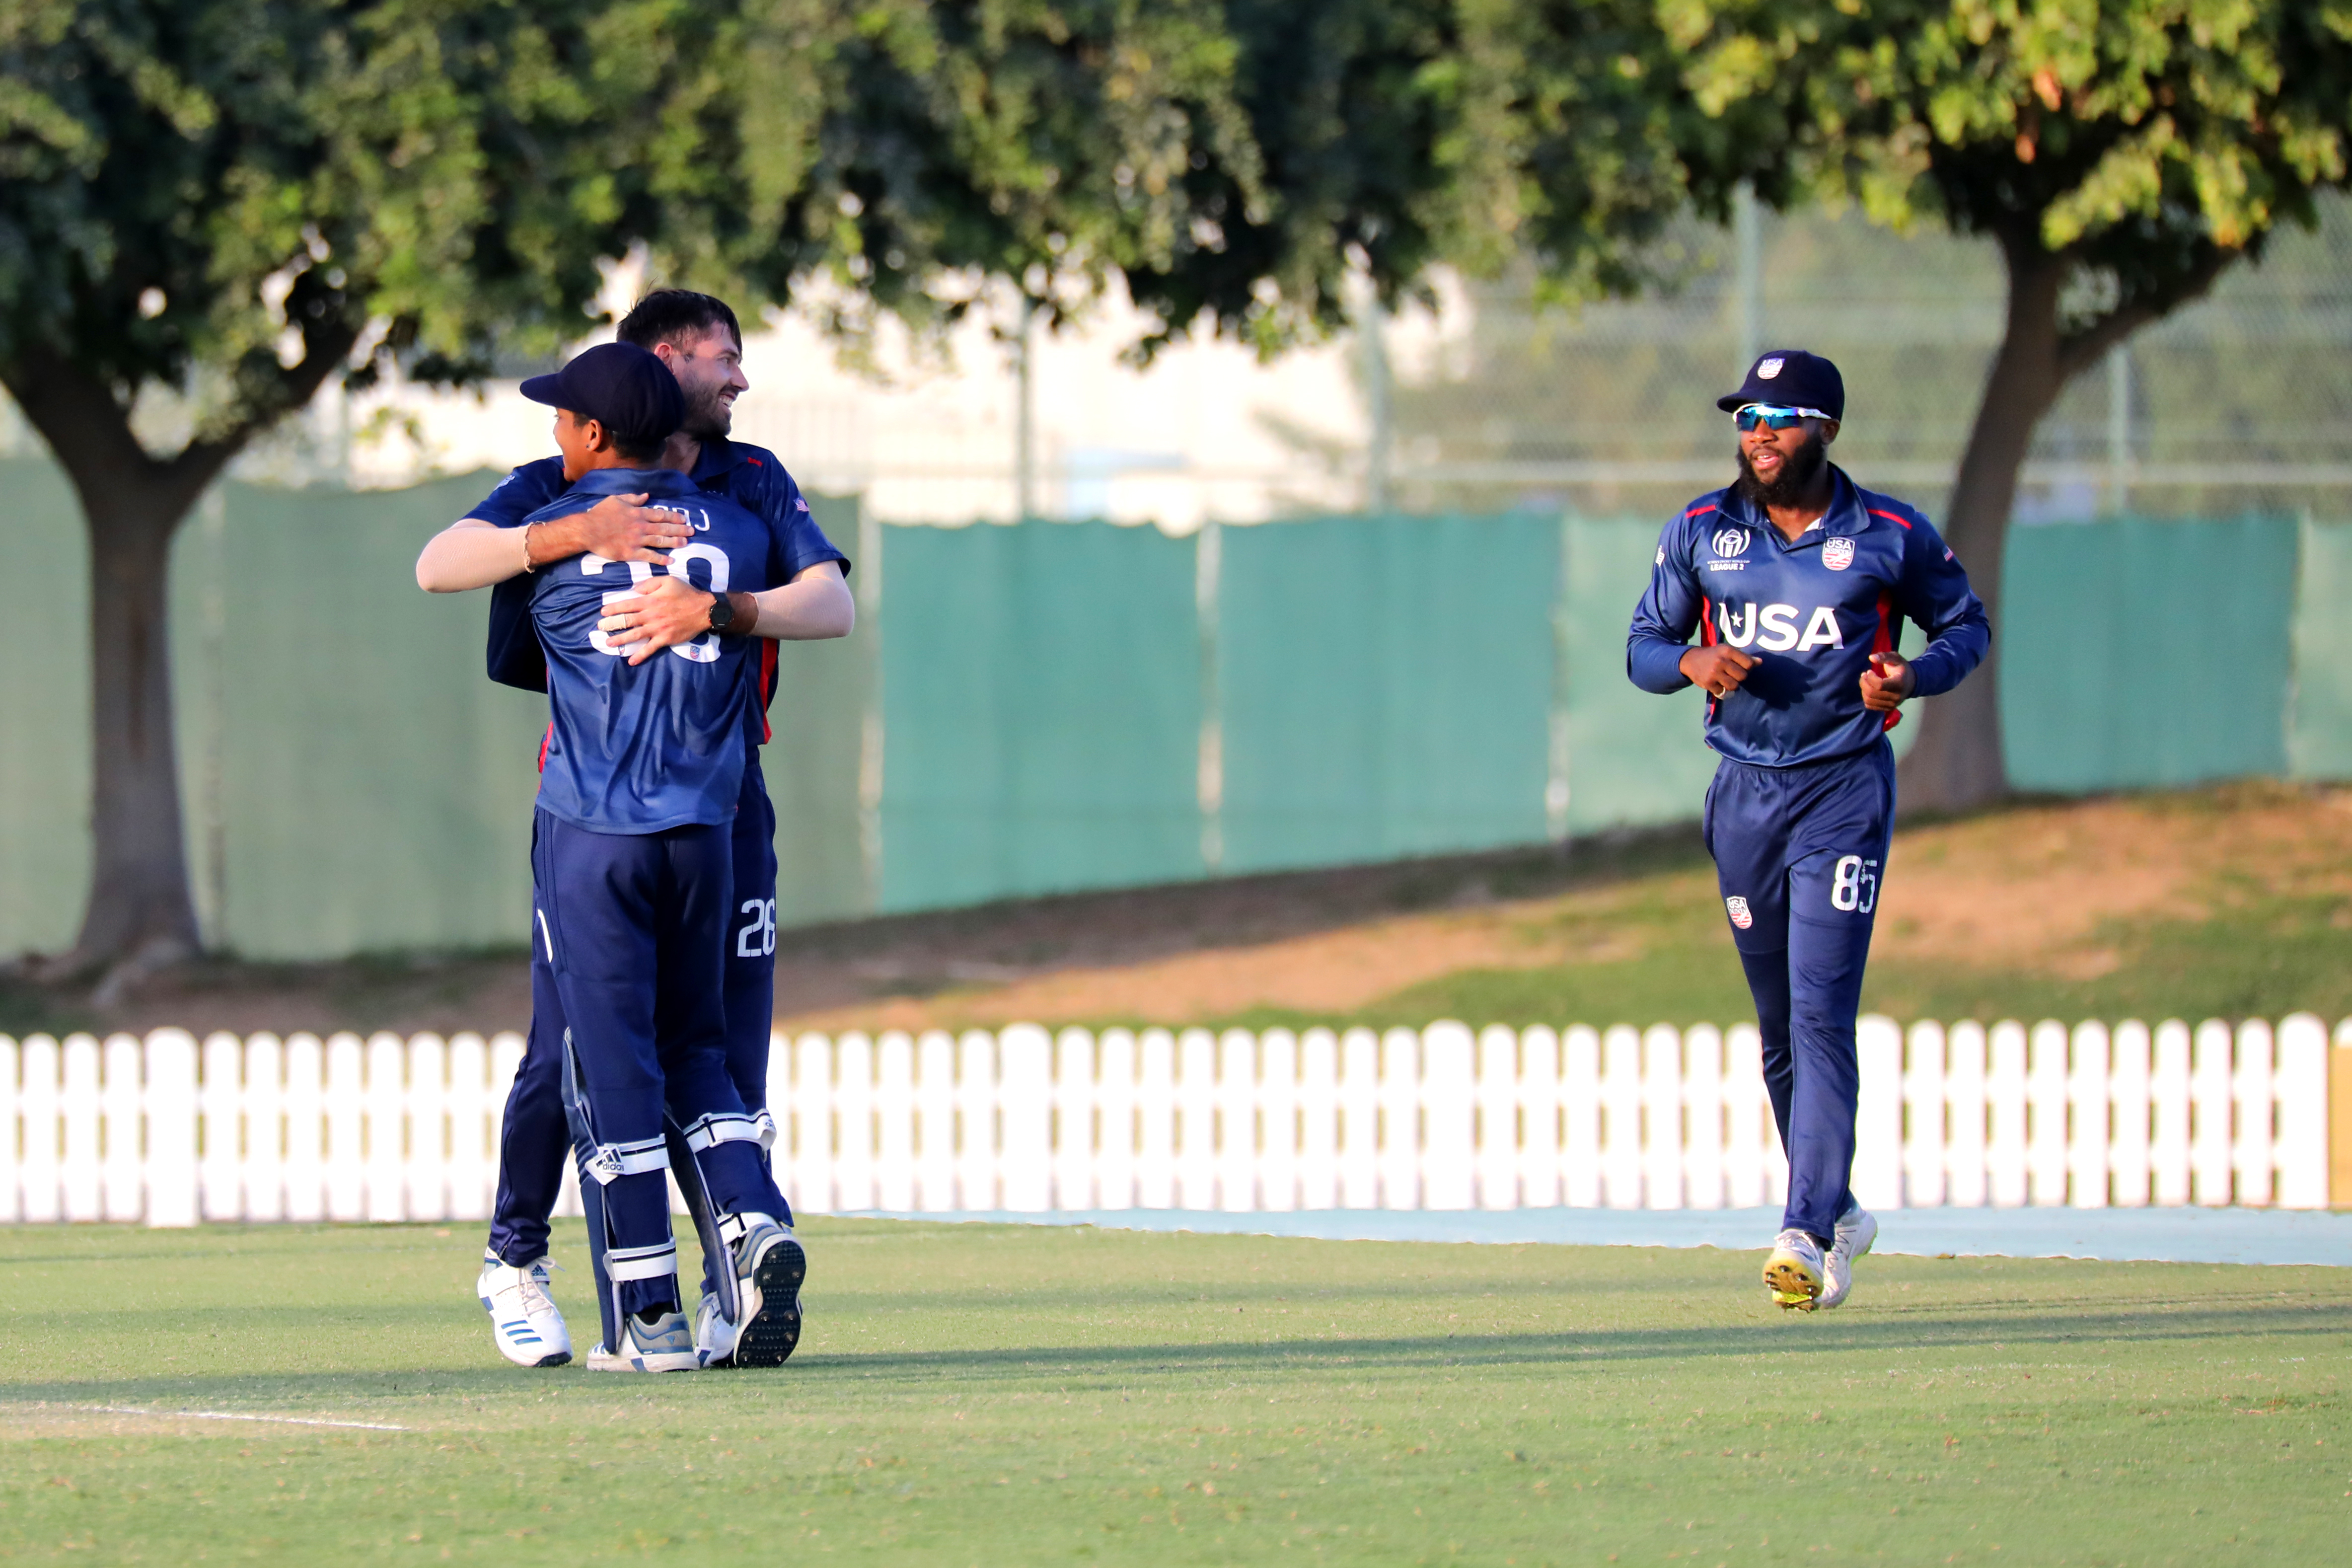 USA extend lead at top of CWC League 2 with big win over UAE